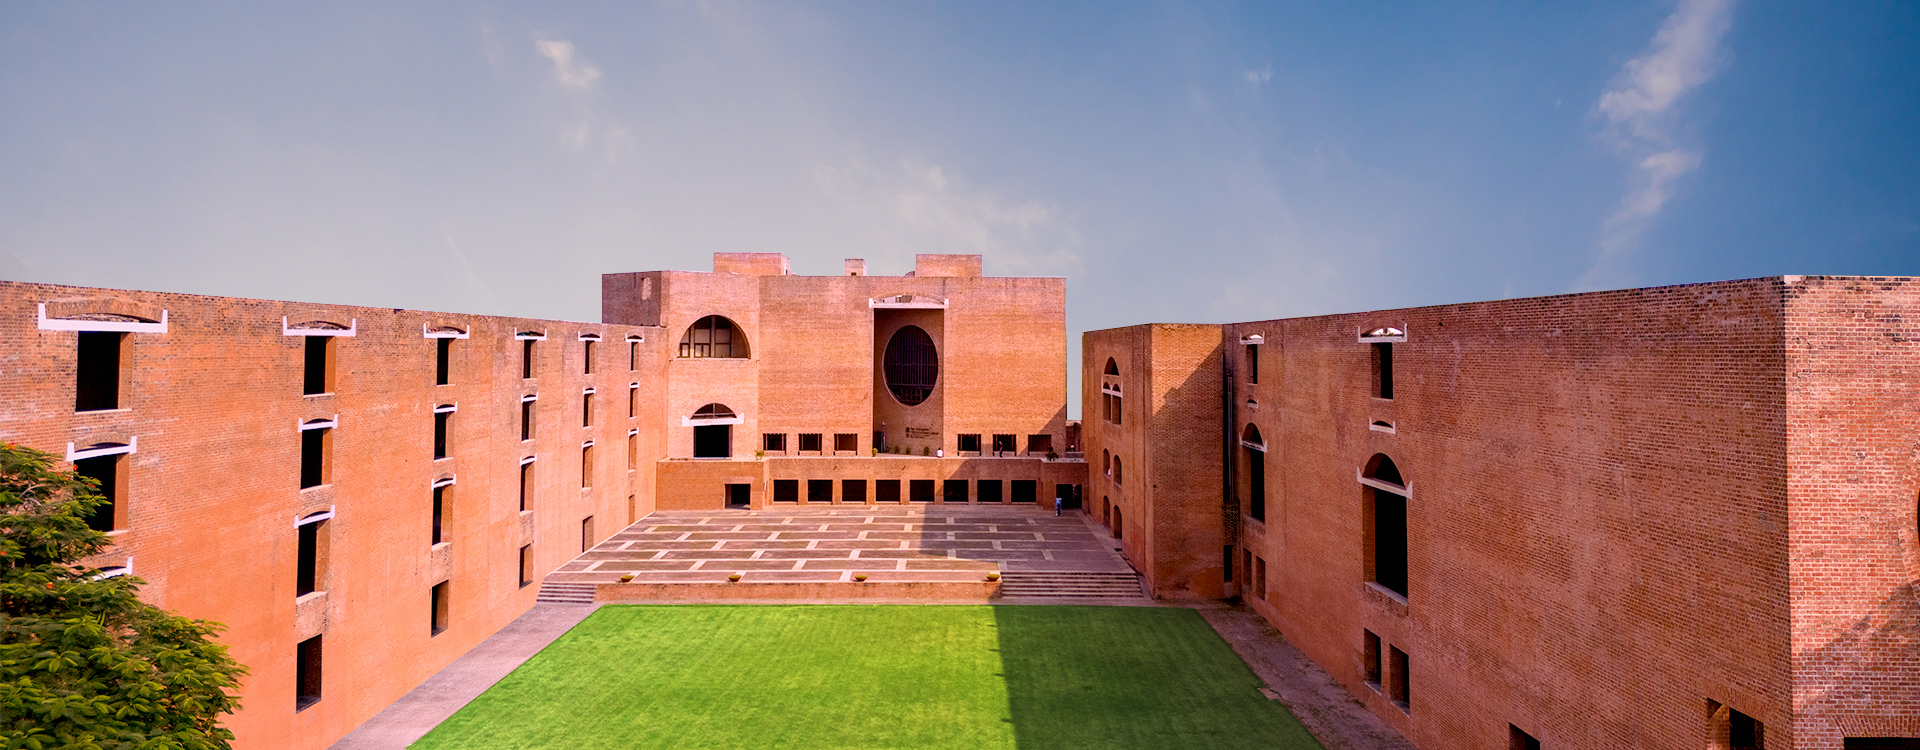 IIMA announces the appointment of Professor Bharat Bhasker as the new Director of the Institute